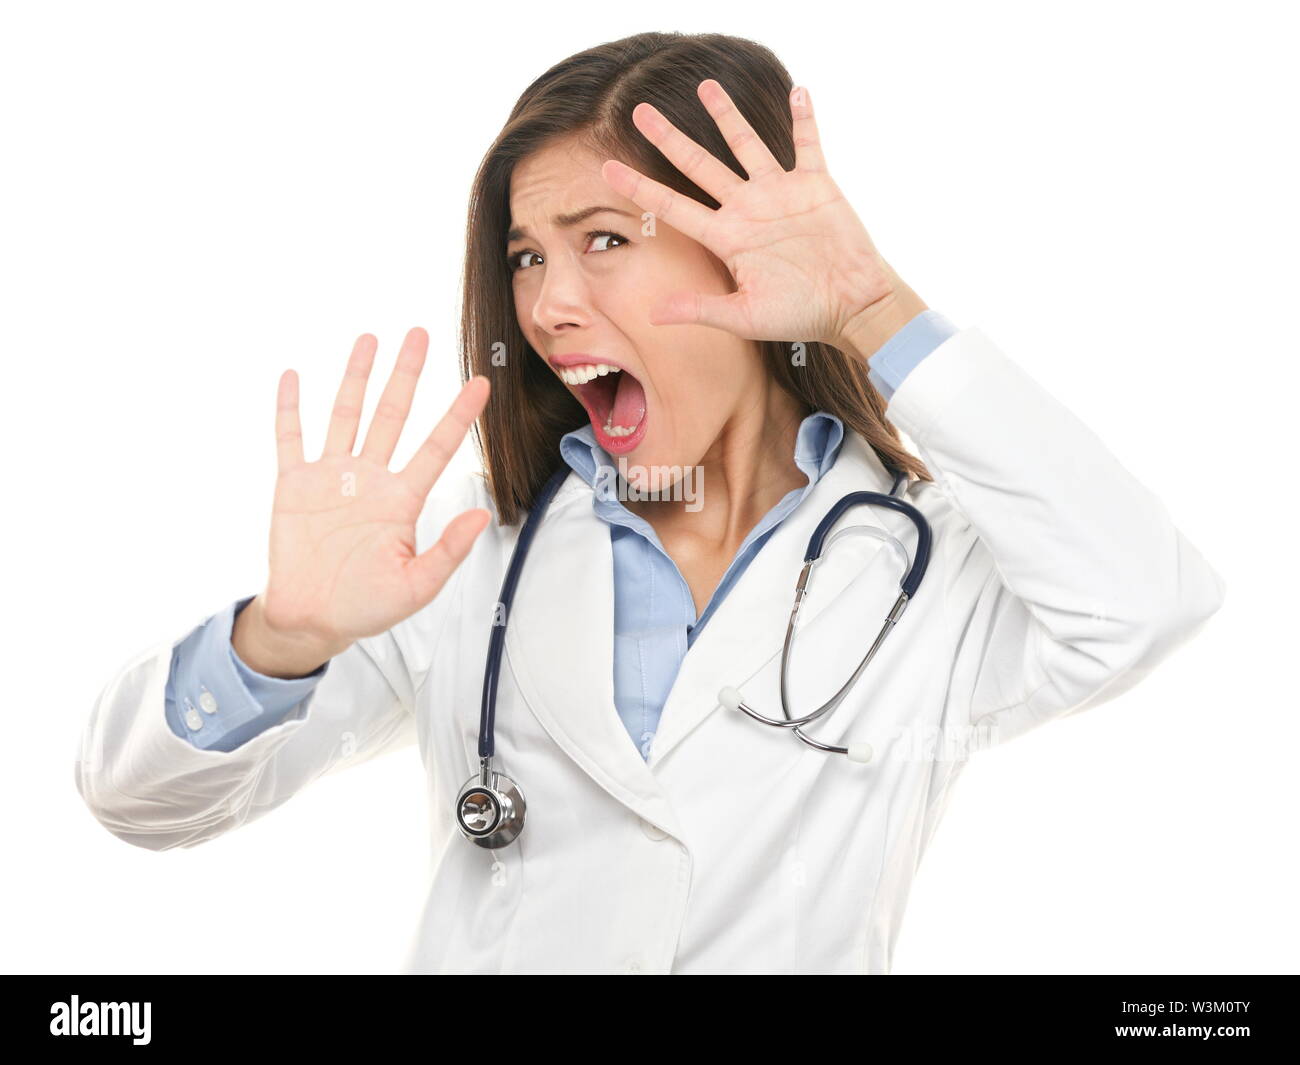 Screaming scared doctor woman afraid and frightened covering her face with hands showing funny expression shocked and surprised. Female medical health care professional isolated on white. Stock Photo